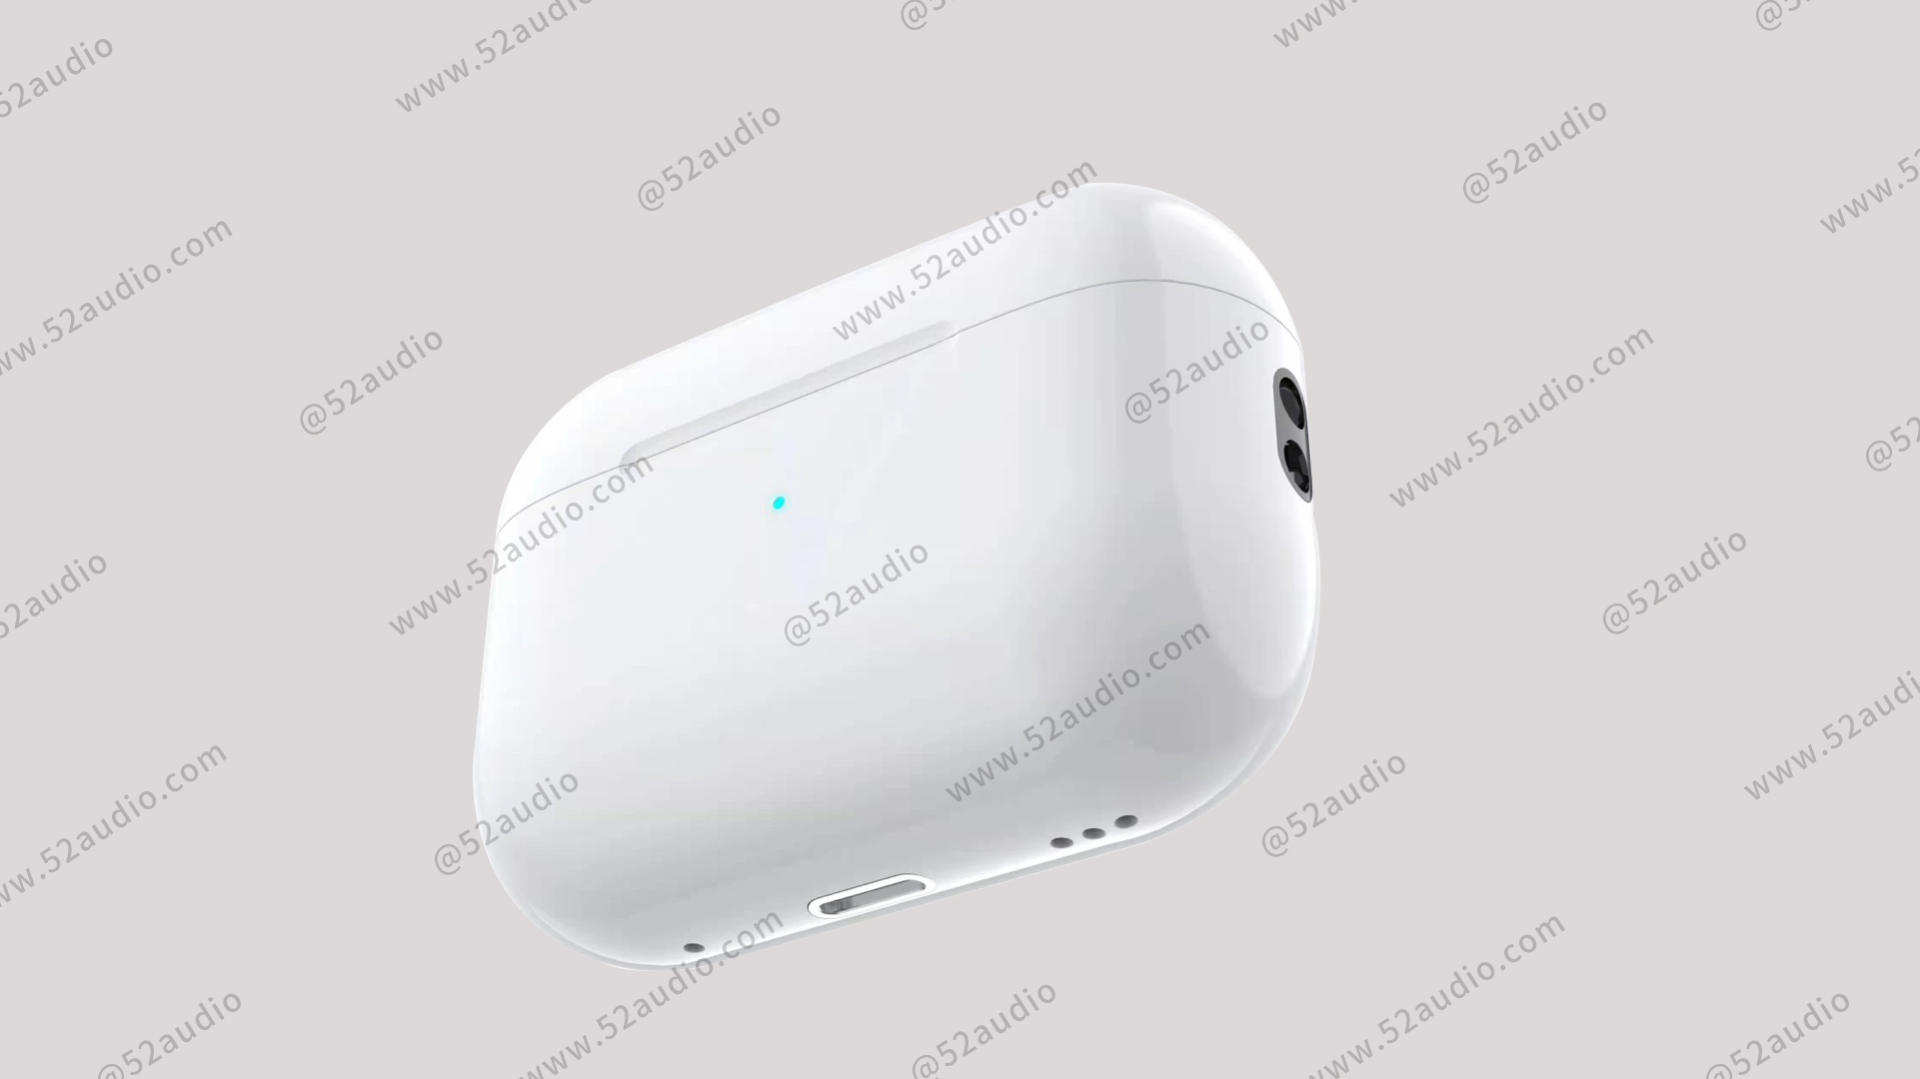 Apple AirPods Pro 2 leaked image hints at updated design for TWS earphones  - Gizmochina